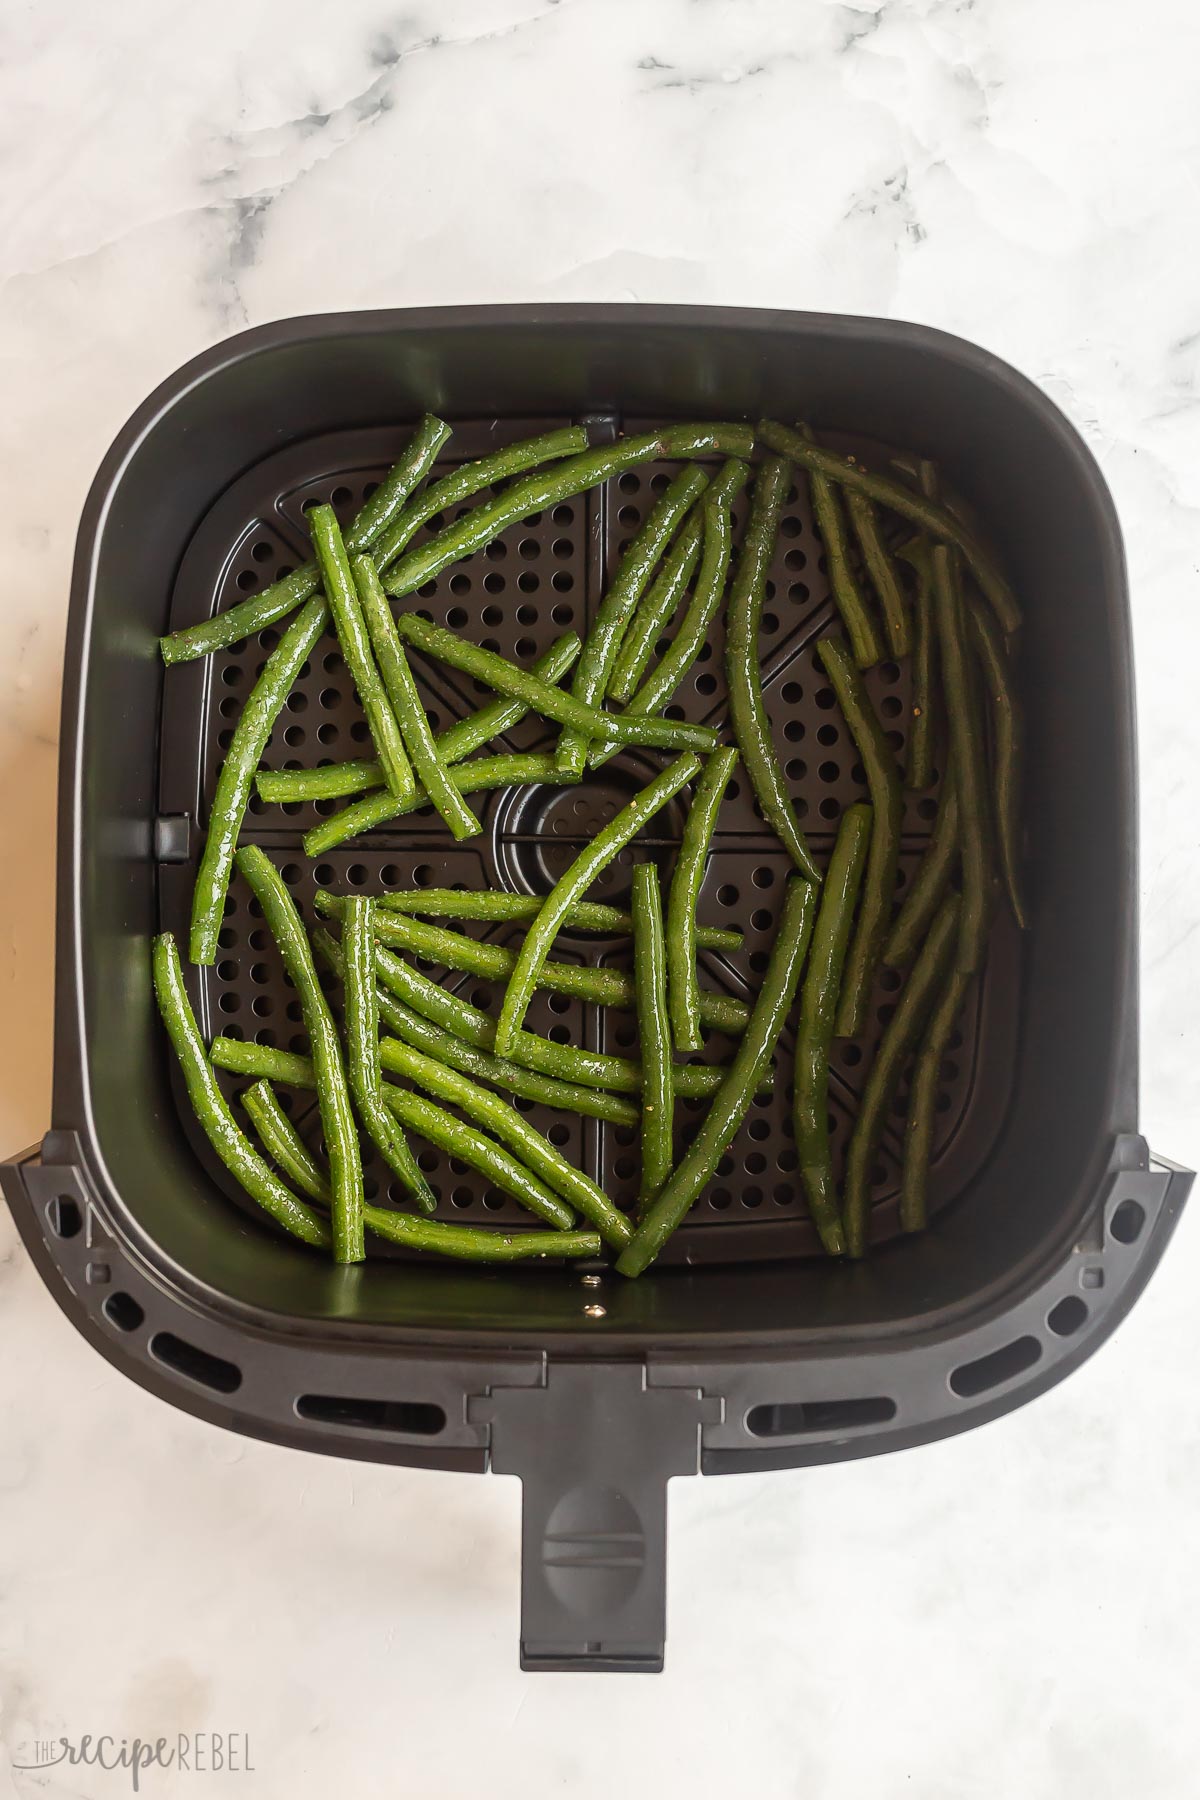 seasoned green beans in air fryer basket ready to cook.